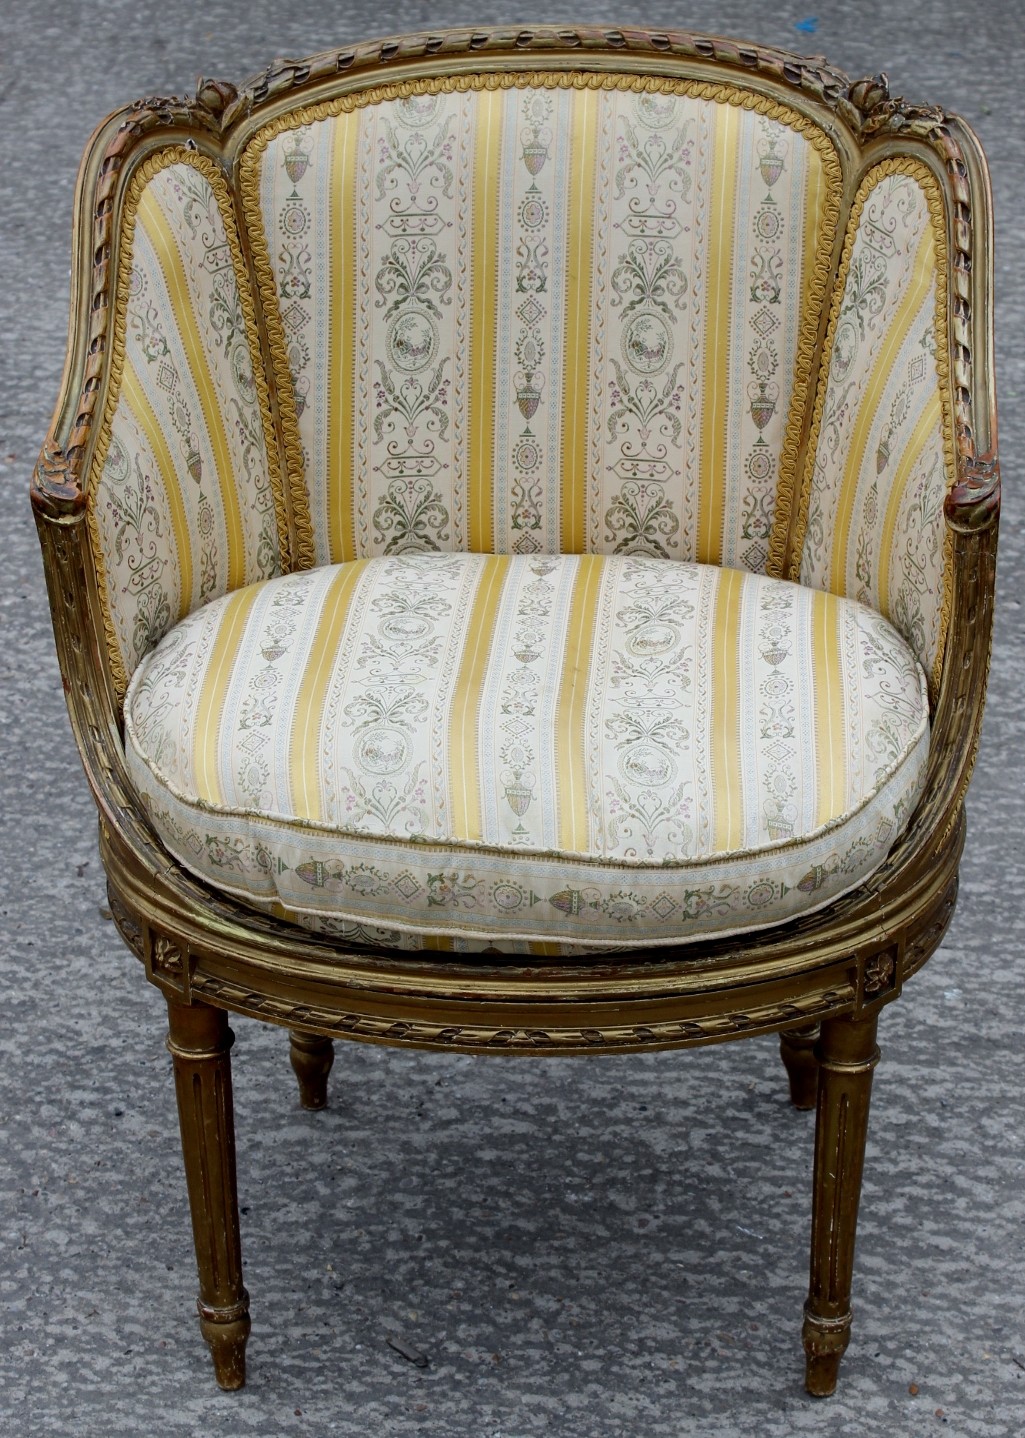 A 19th Century Louis XVI style gilt framed bergere chair, striped upholstery, circular seat,